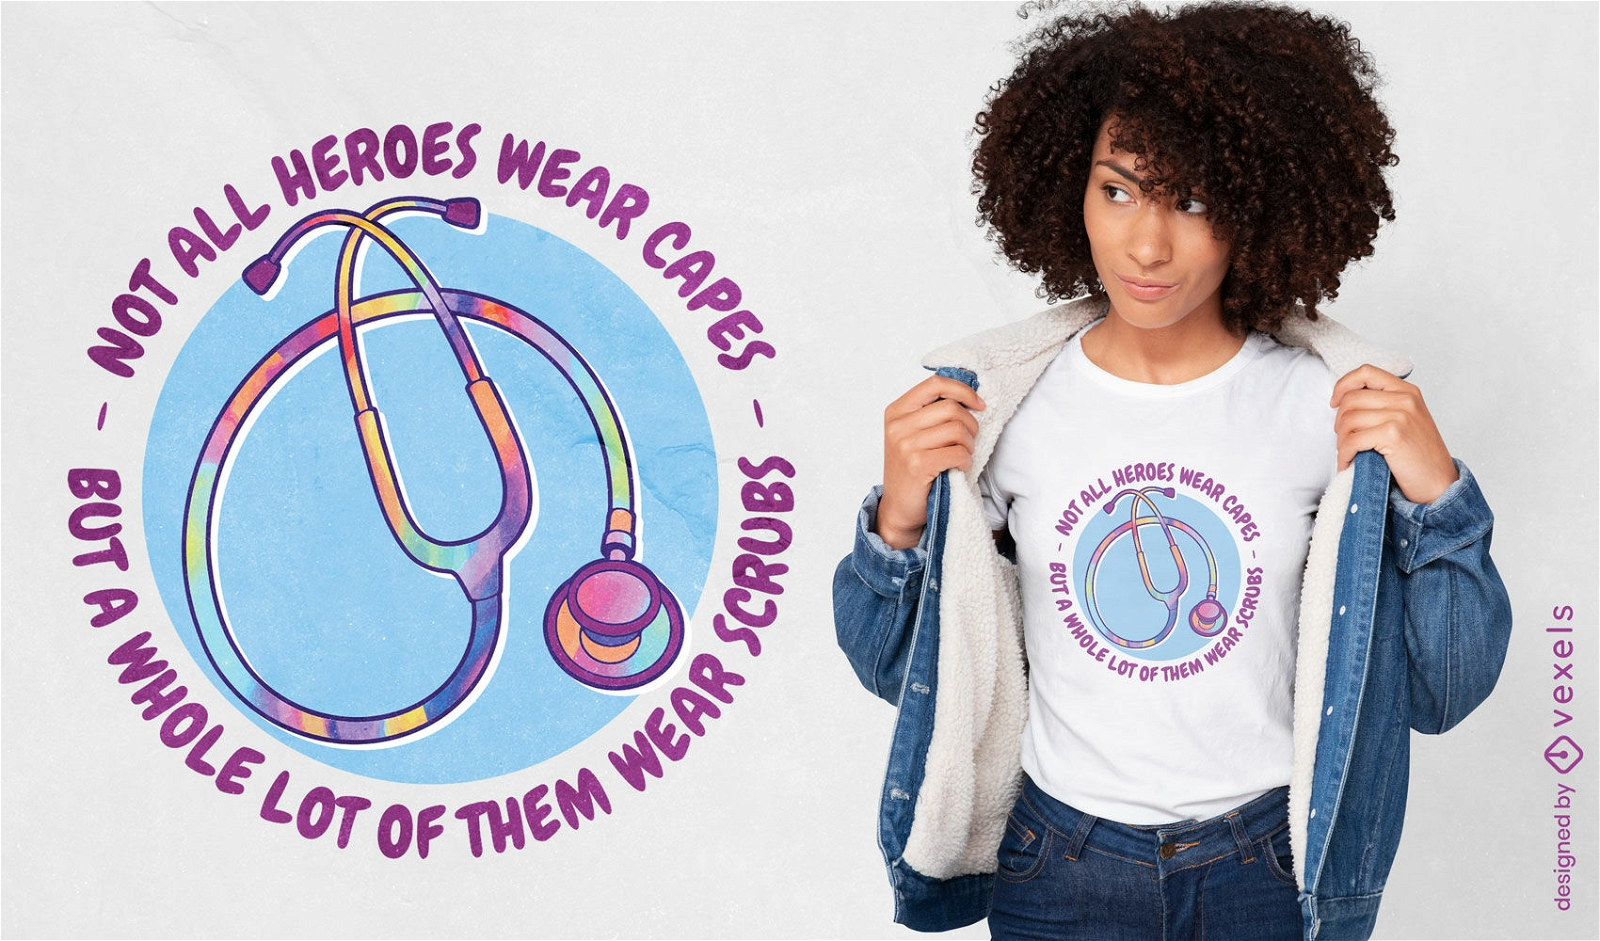 Healthcare heroes quote t-shirt design